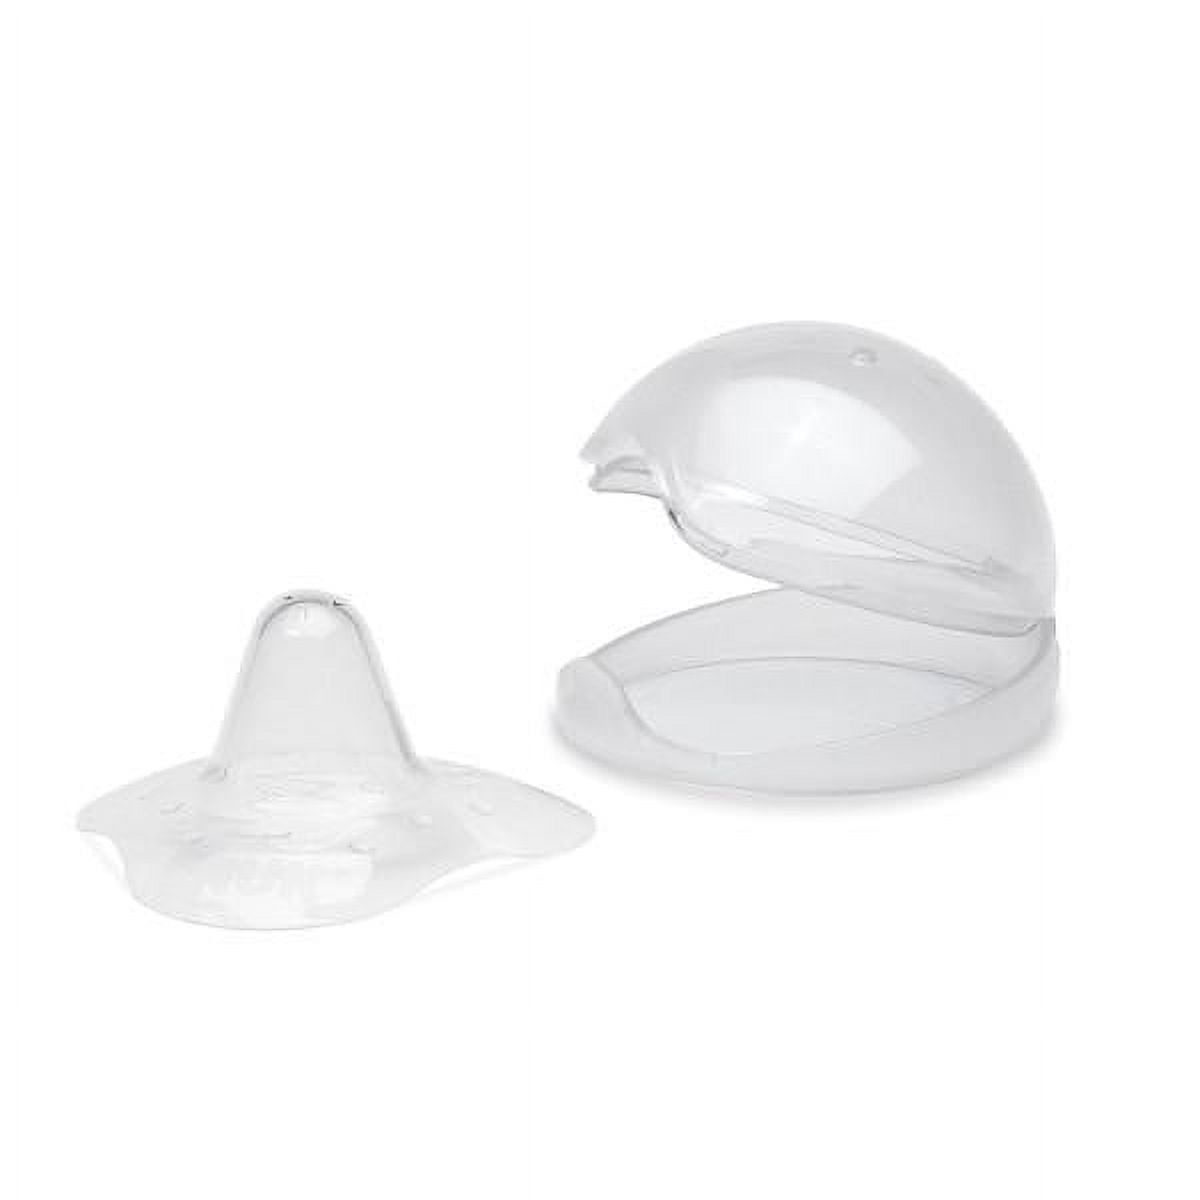 What is a nipple shield and when should you use one? – The